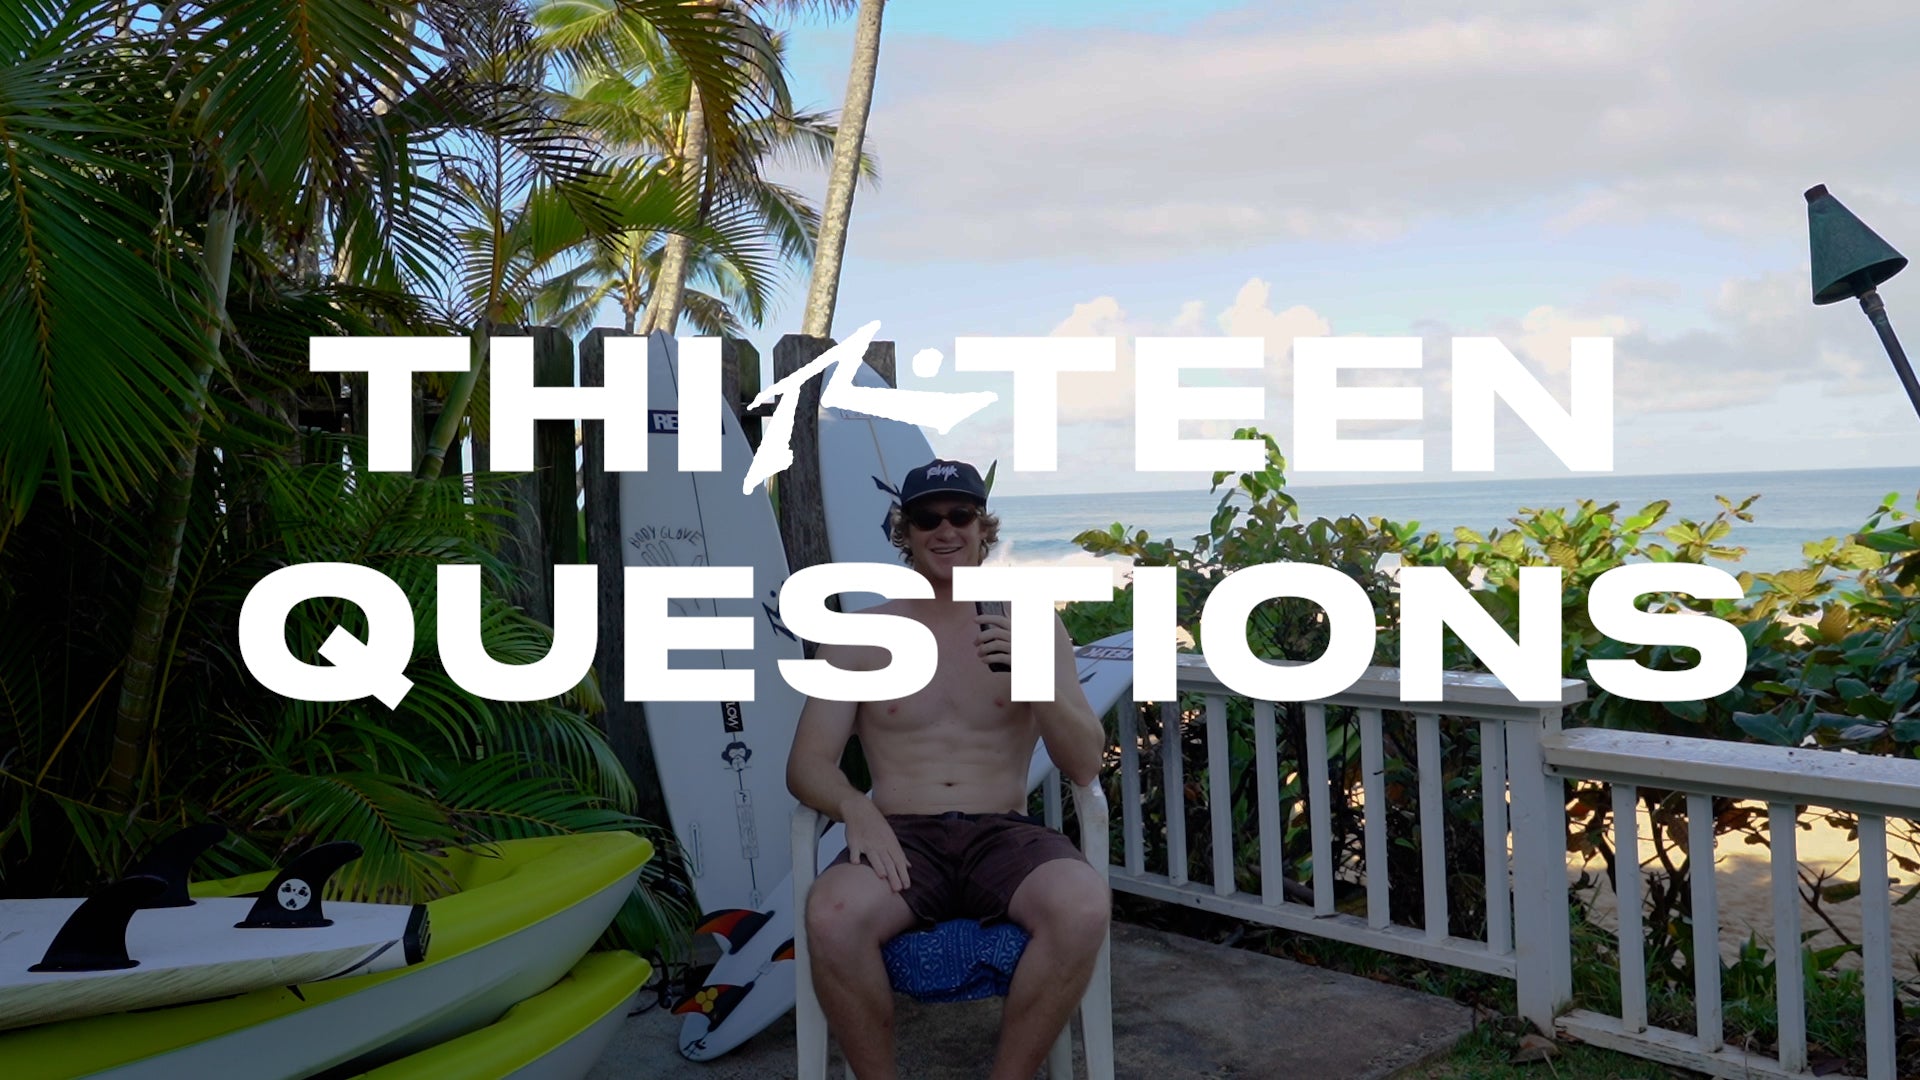 Thirteen Questions with Noah Hill - Rusty Surfboards